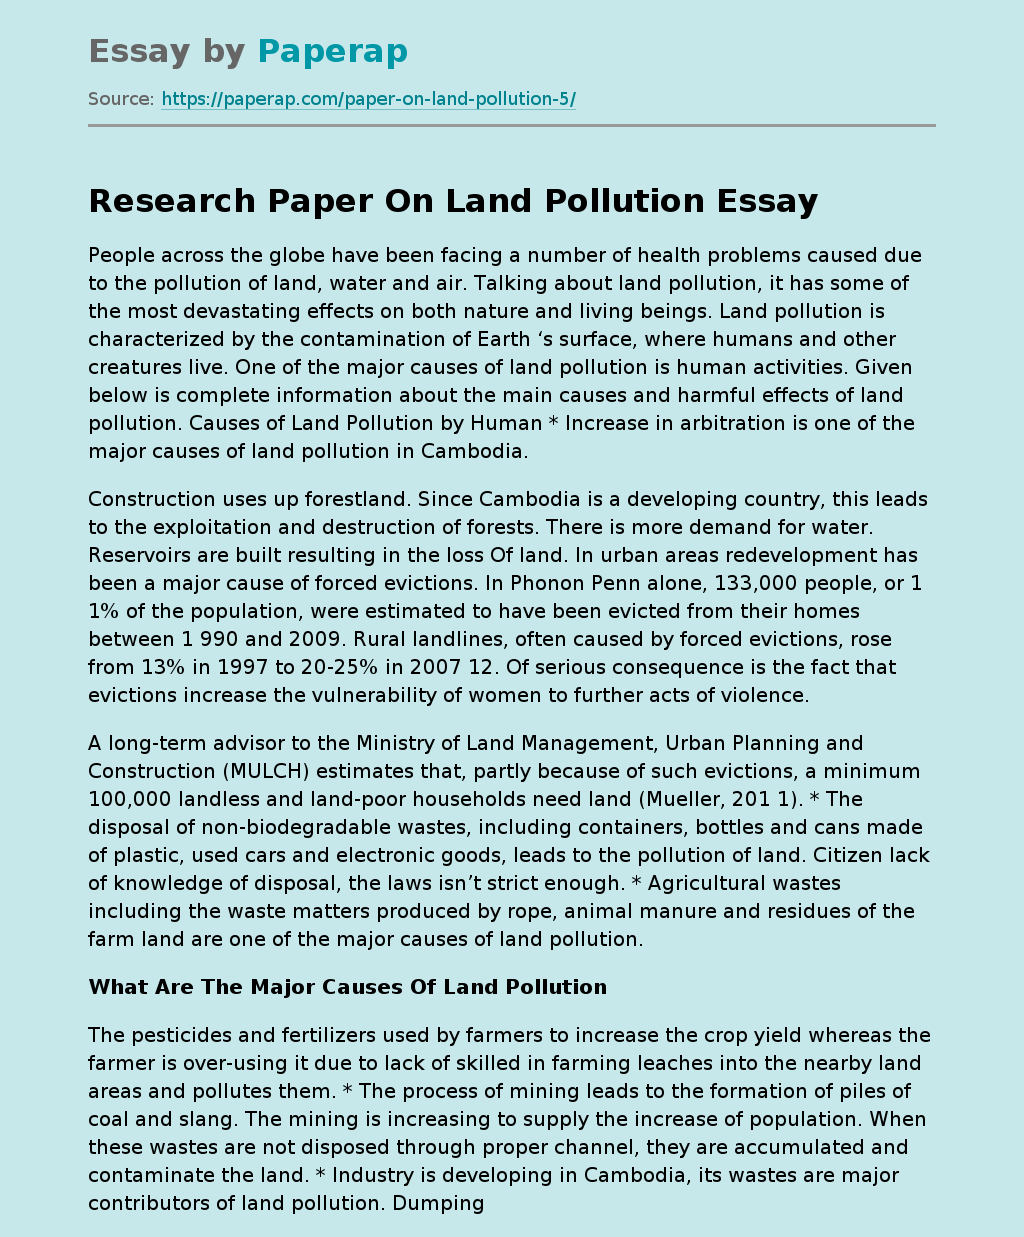 Research Paper On Land Pollution